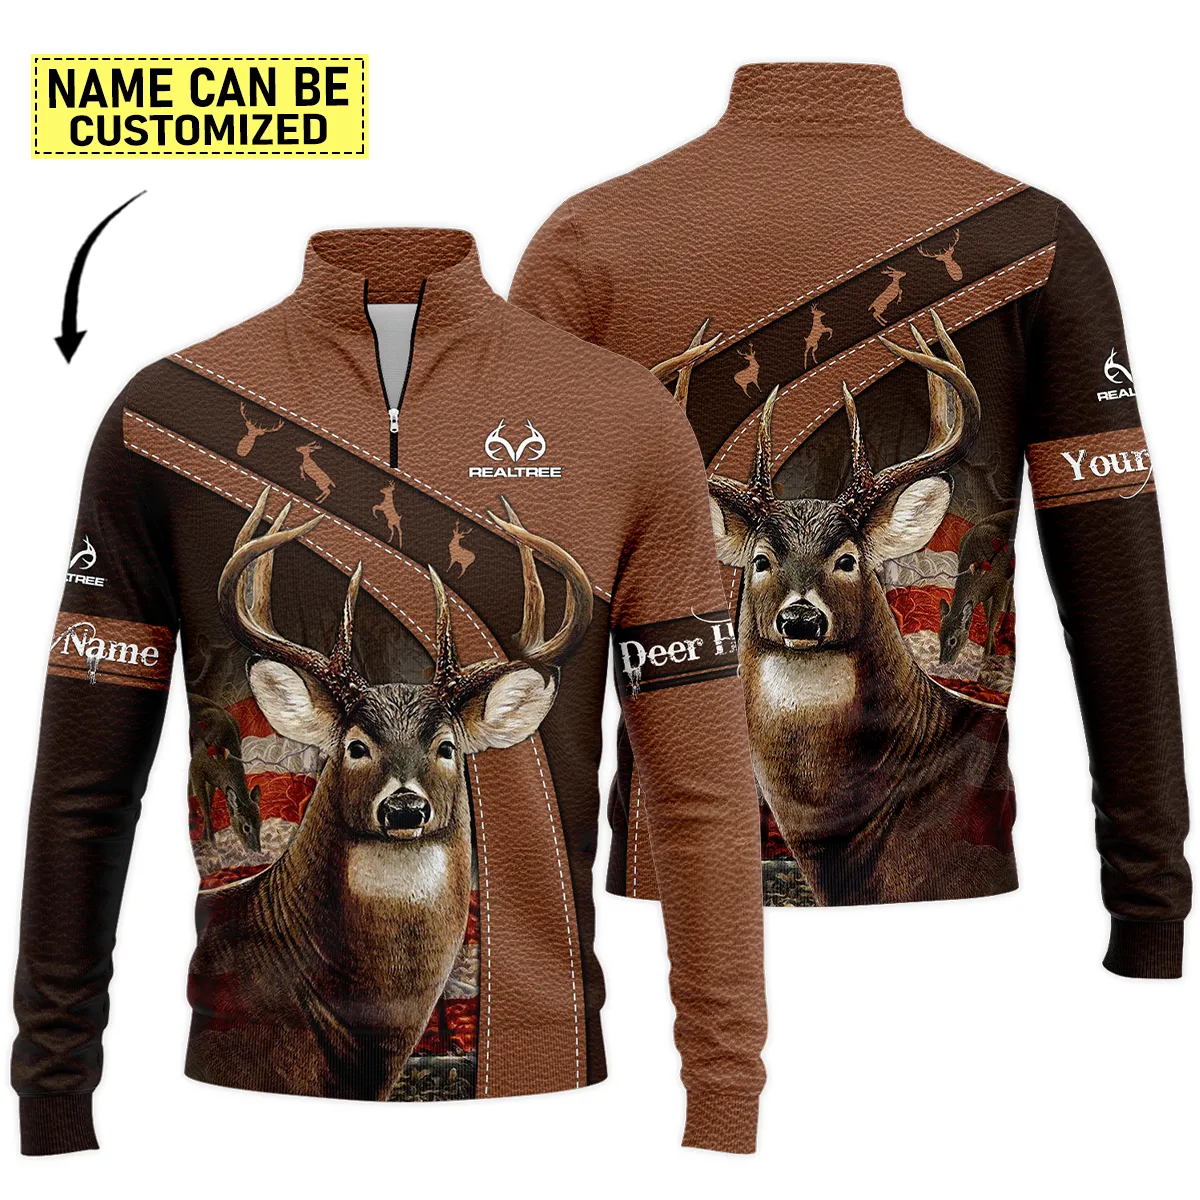 Personalized Name Deer Hunting Leather Brown Realtree s Quarter-Zip Jacket